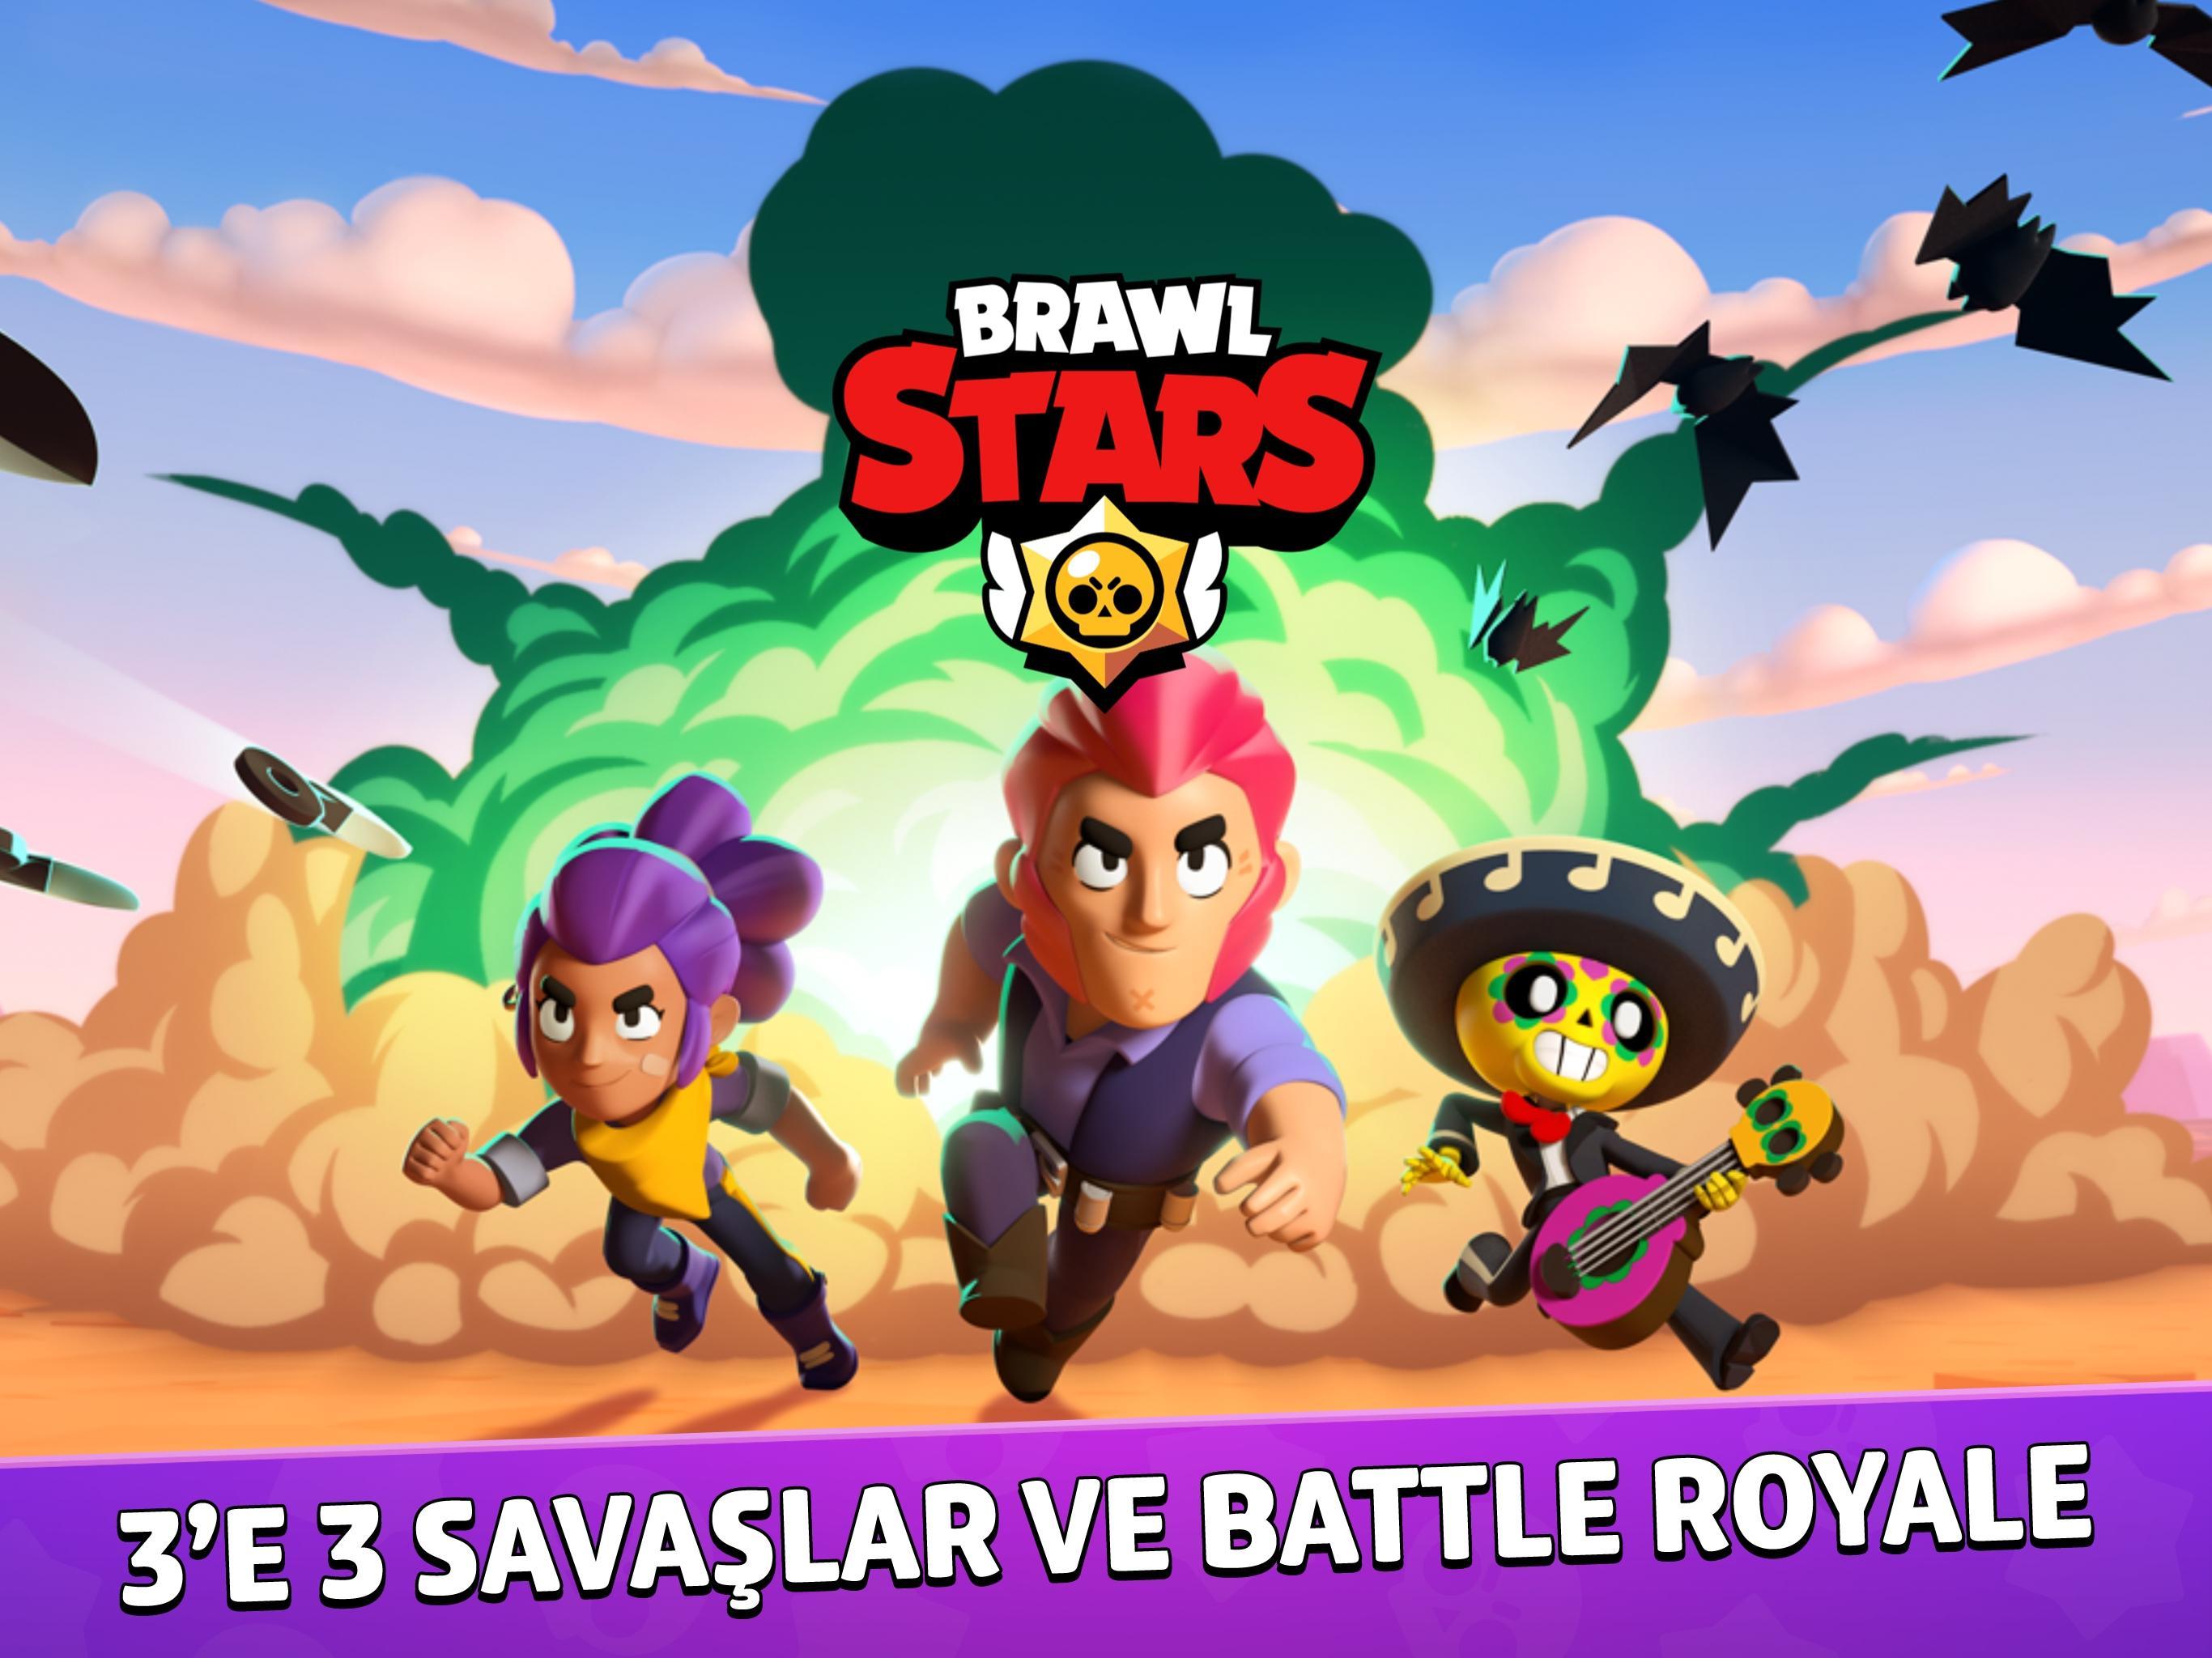 Brawl Stars Apk Download Pick Up Your Hero Characters In 3v3 Smash And Grab Mode Brock Shelly Jessie And Barley - roblox apk indir hile